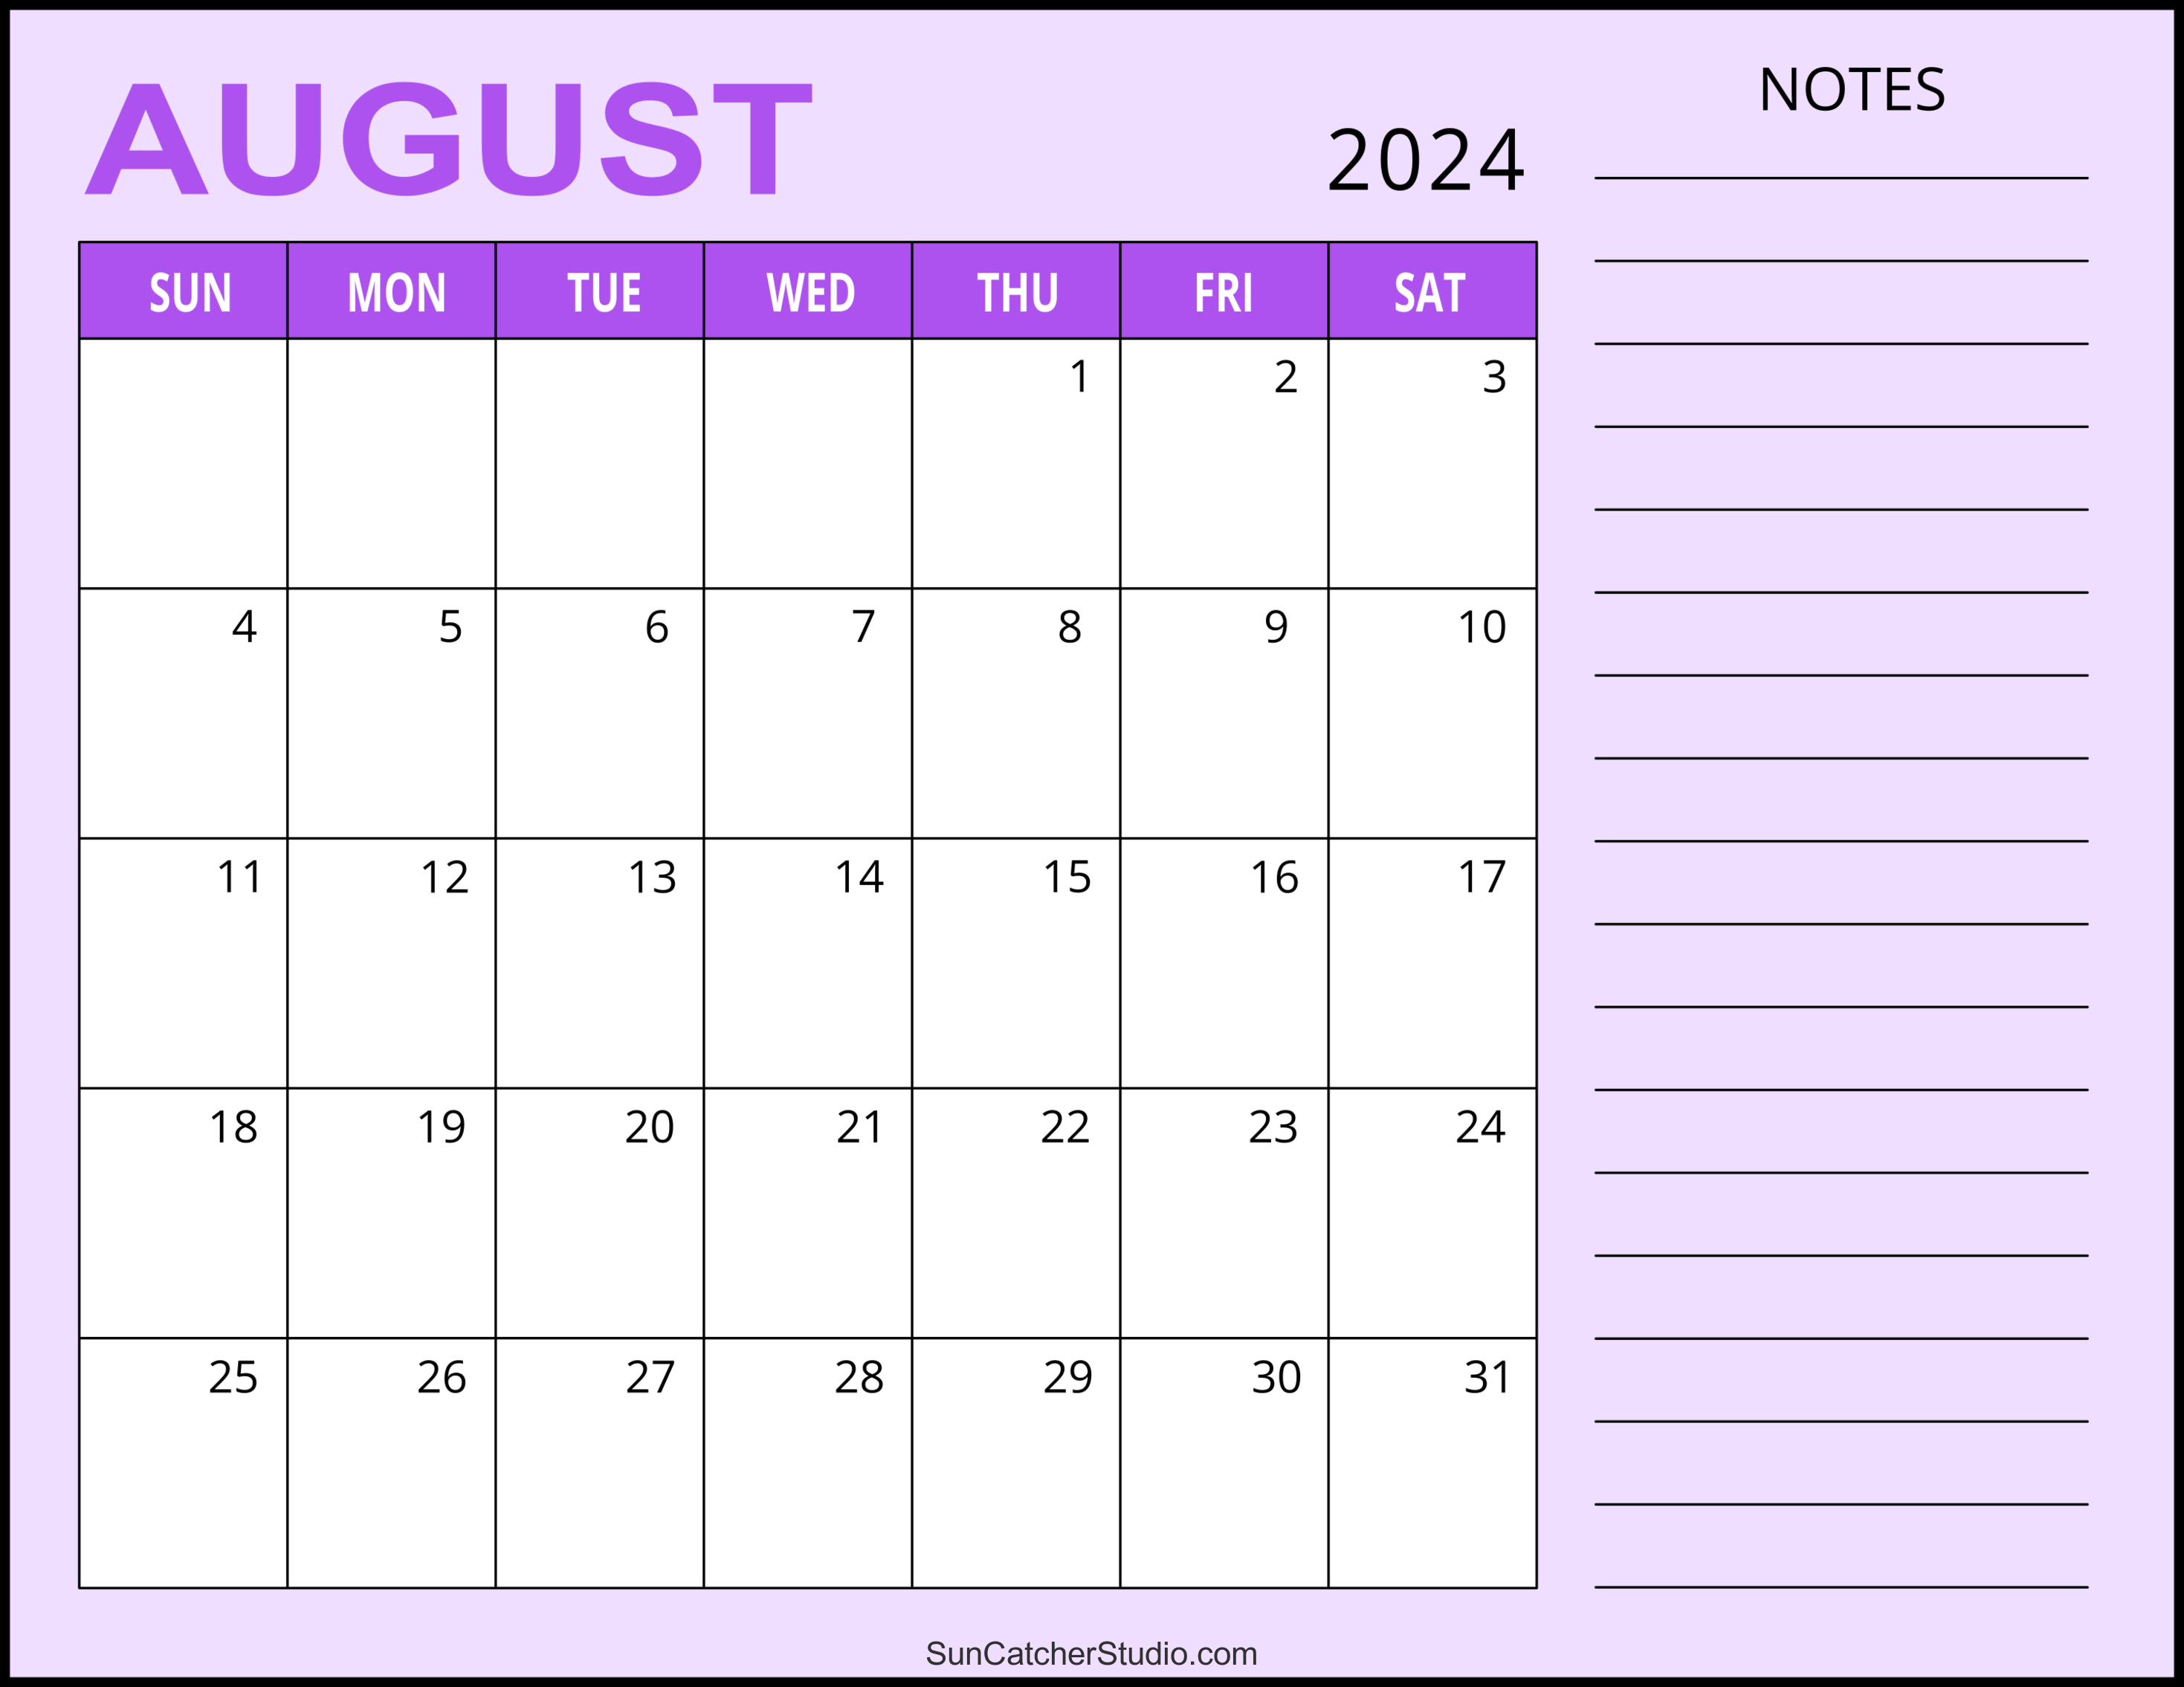 August 2024 Calendar (Free Printable) – Diy Projects, Patterns regarding Free Printable August 2024 Calendar With Notes